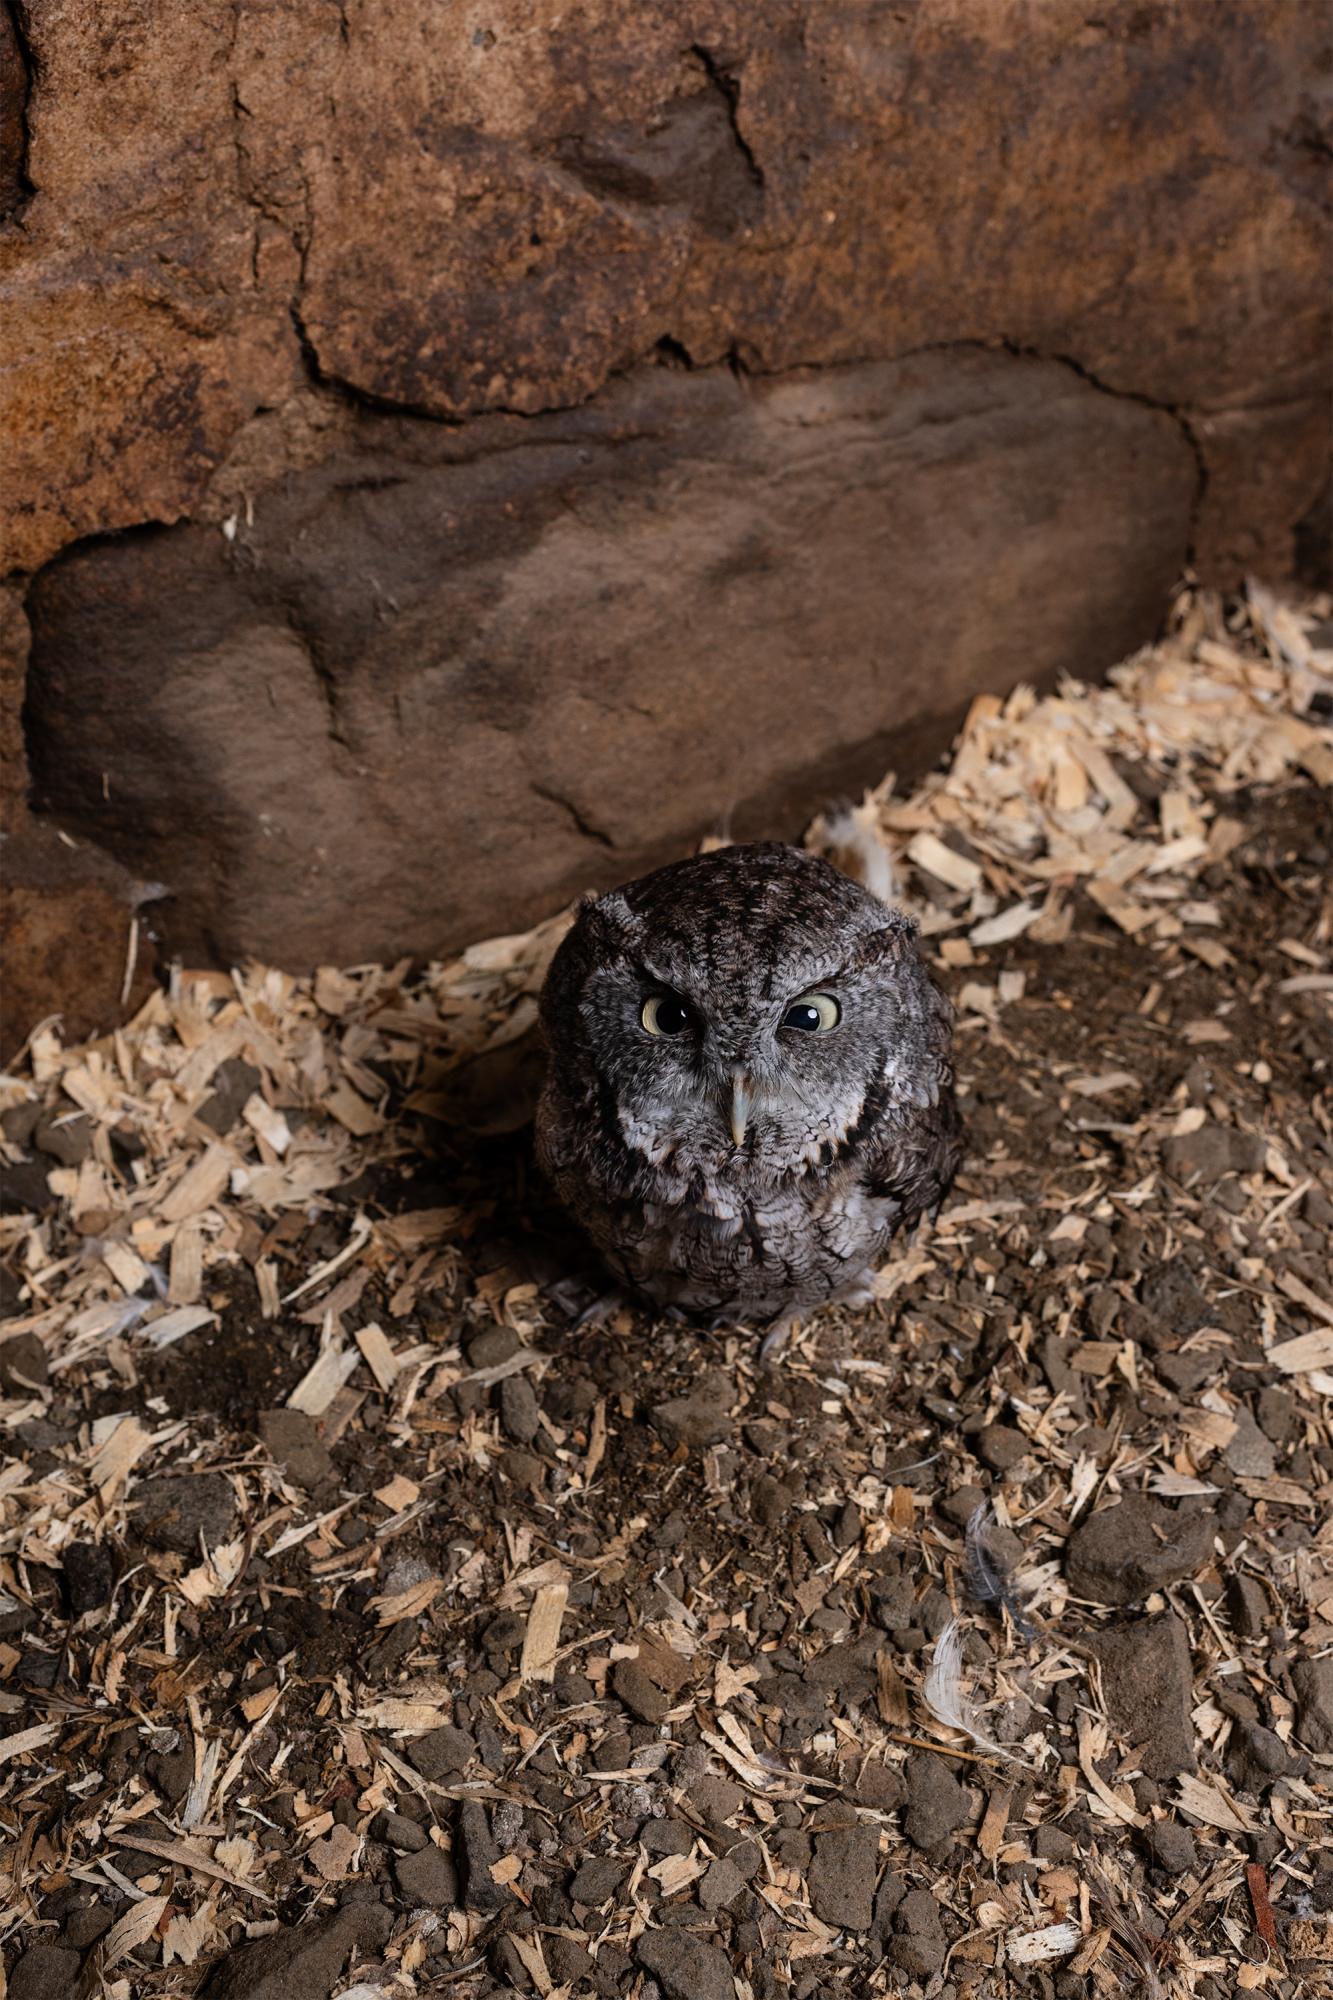 It Takes a Village - A baby Screech owl found on the street.